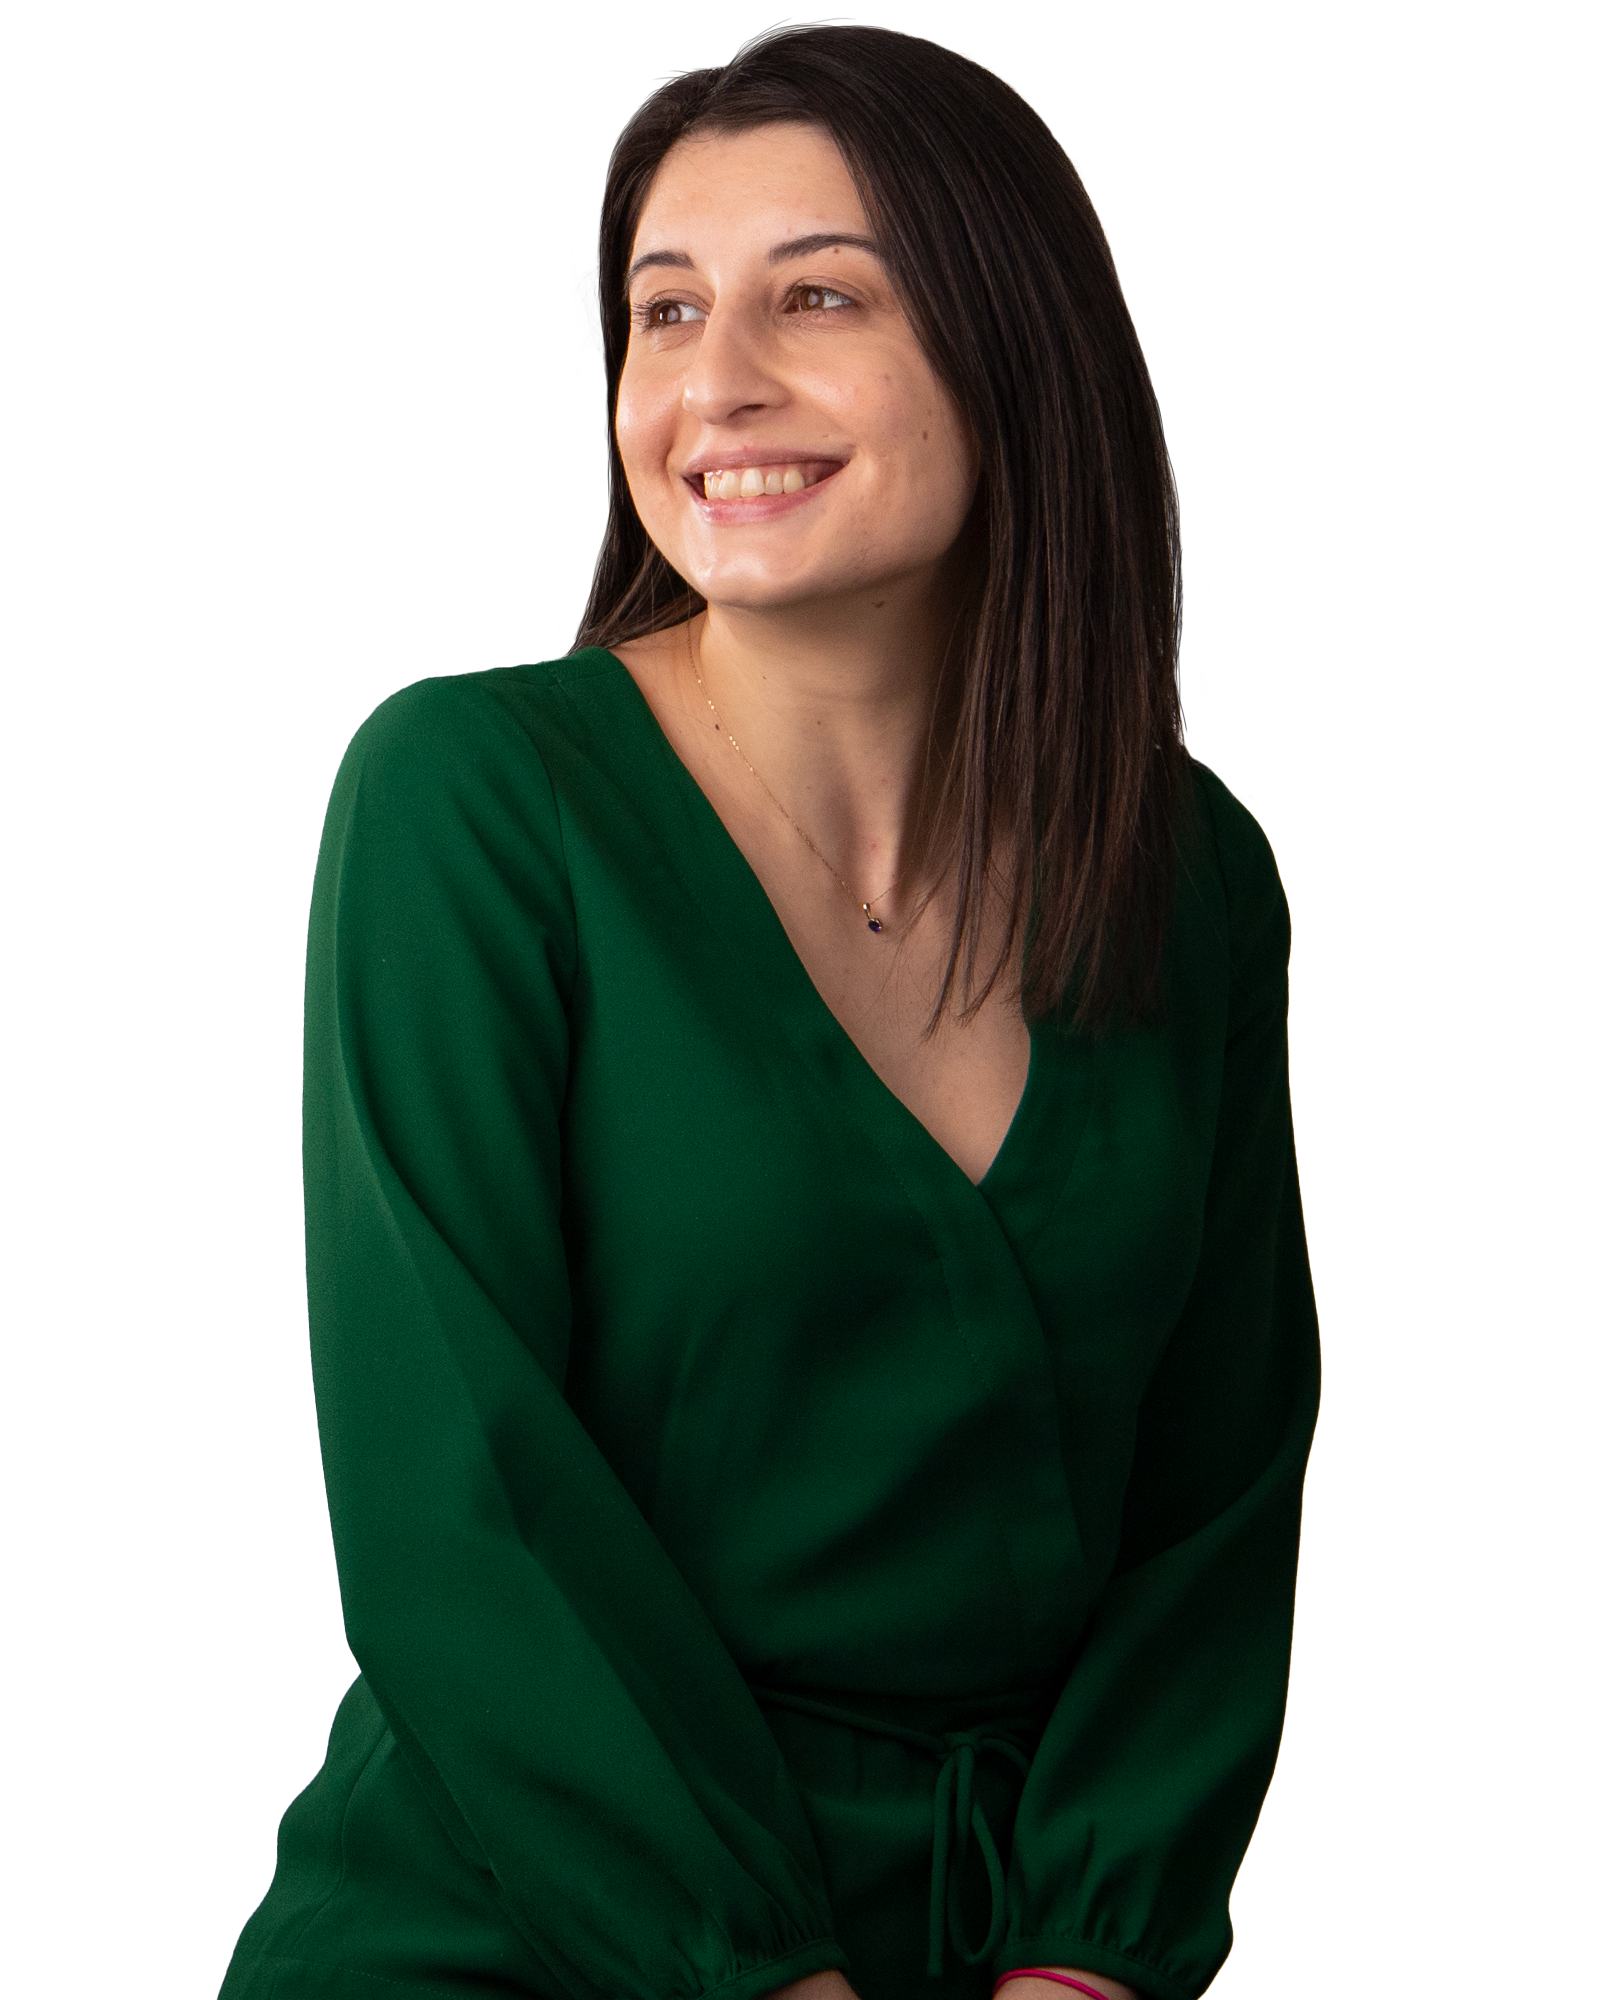 A woman smiling wearing a green jumper